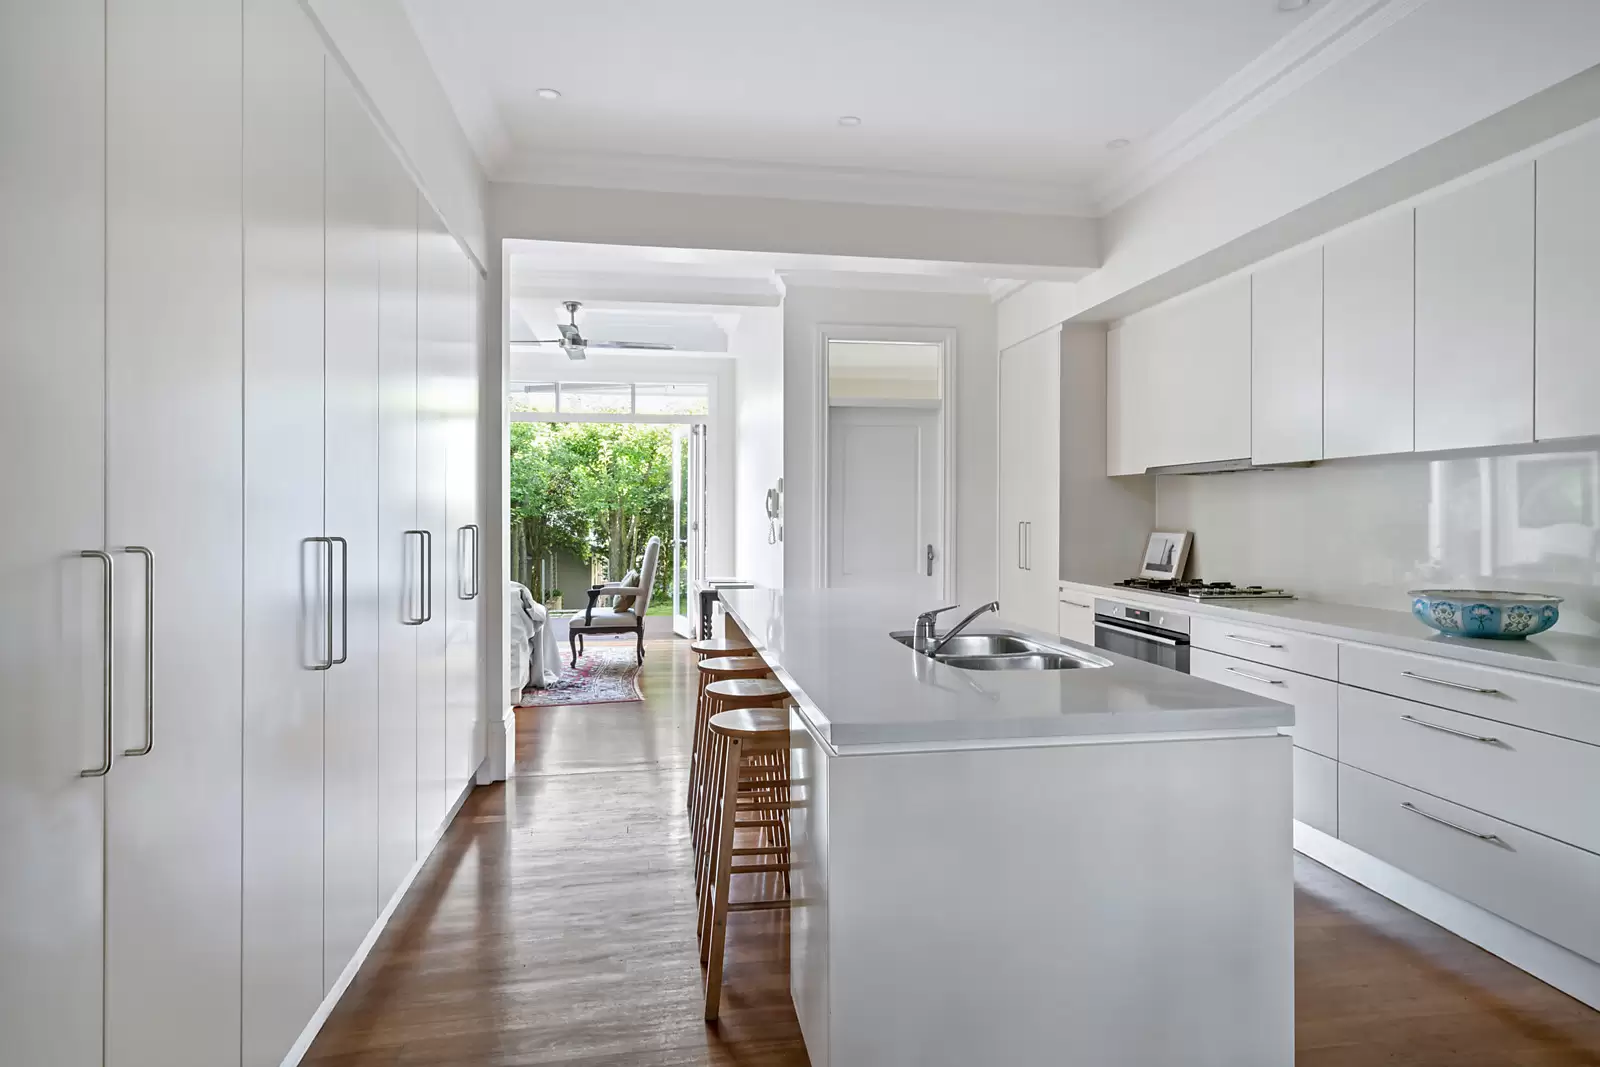 Photo #8: 198 Queen Street, Woollahra - Auction by Sydney Sotheby's International Realty